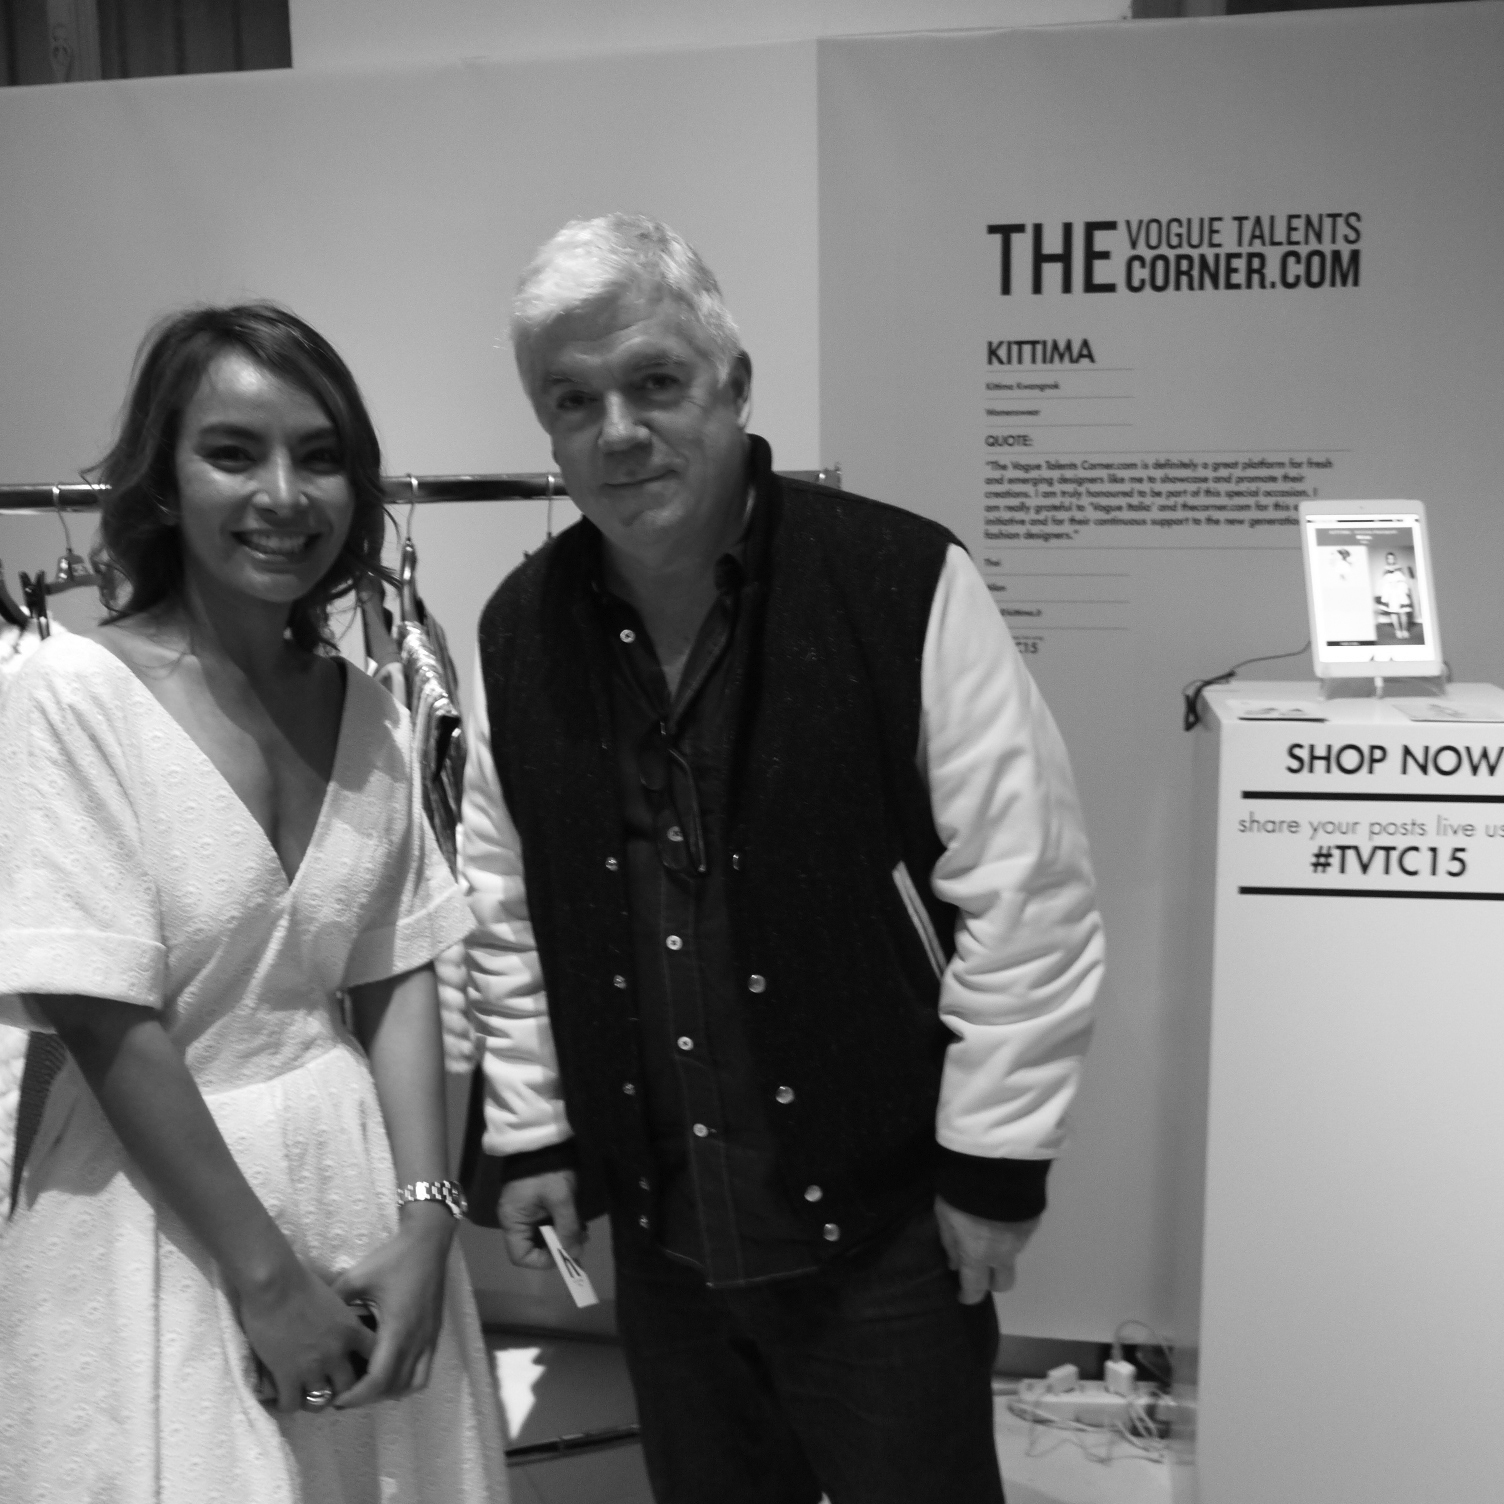 Tim Blanks, Editor at large for Style.com